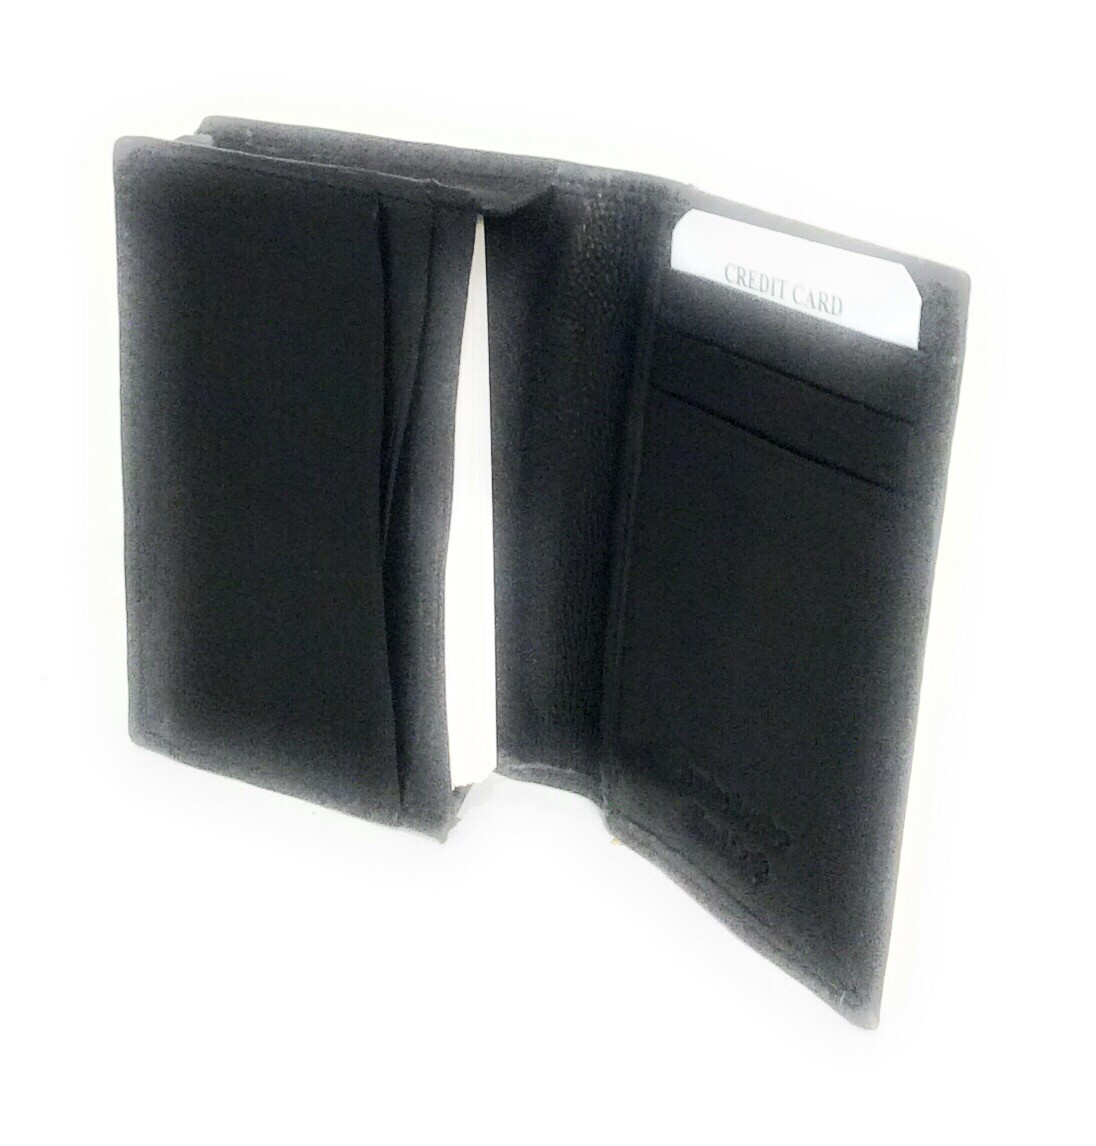 Business card holders with 3 credit card holders 